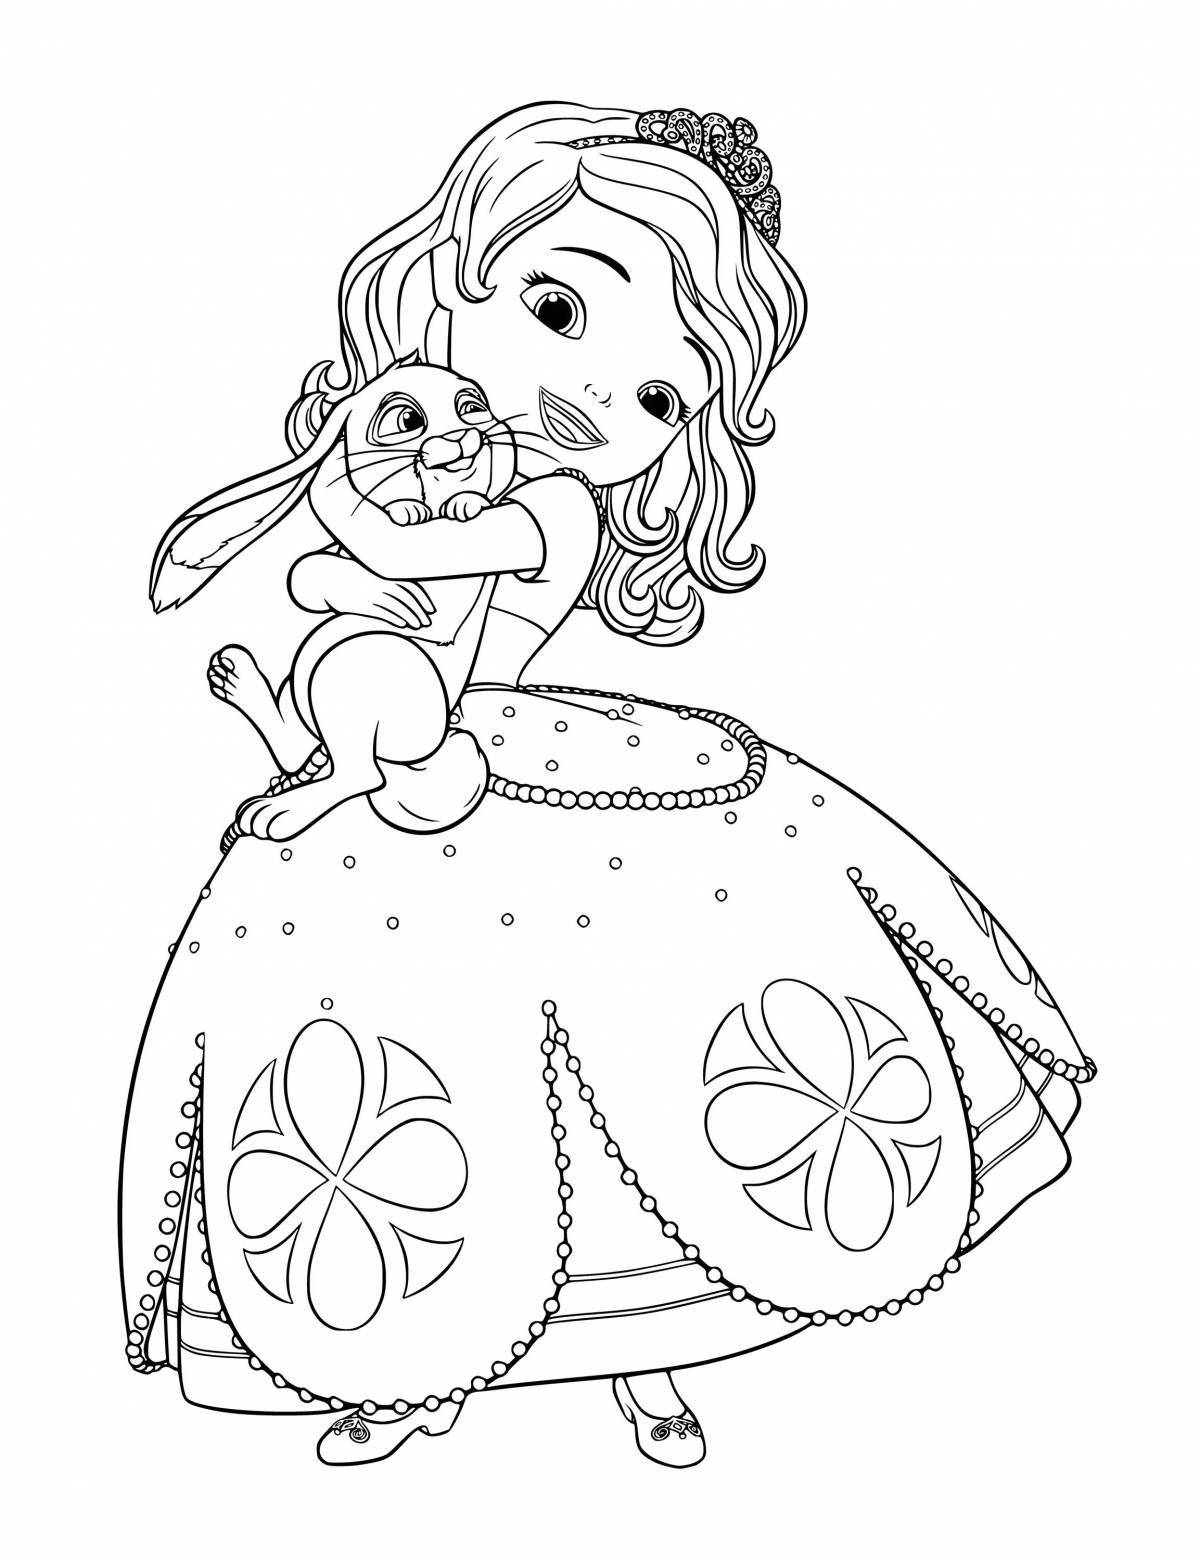 Color-frenzy coloring page for 5 year old girls